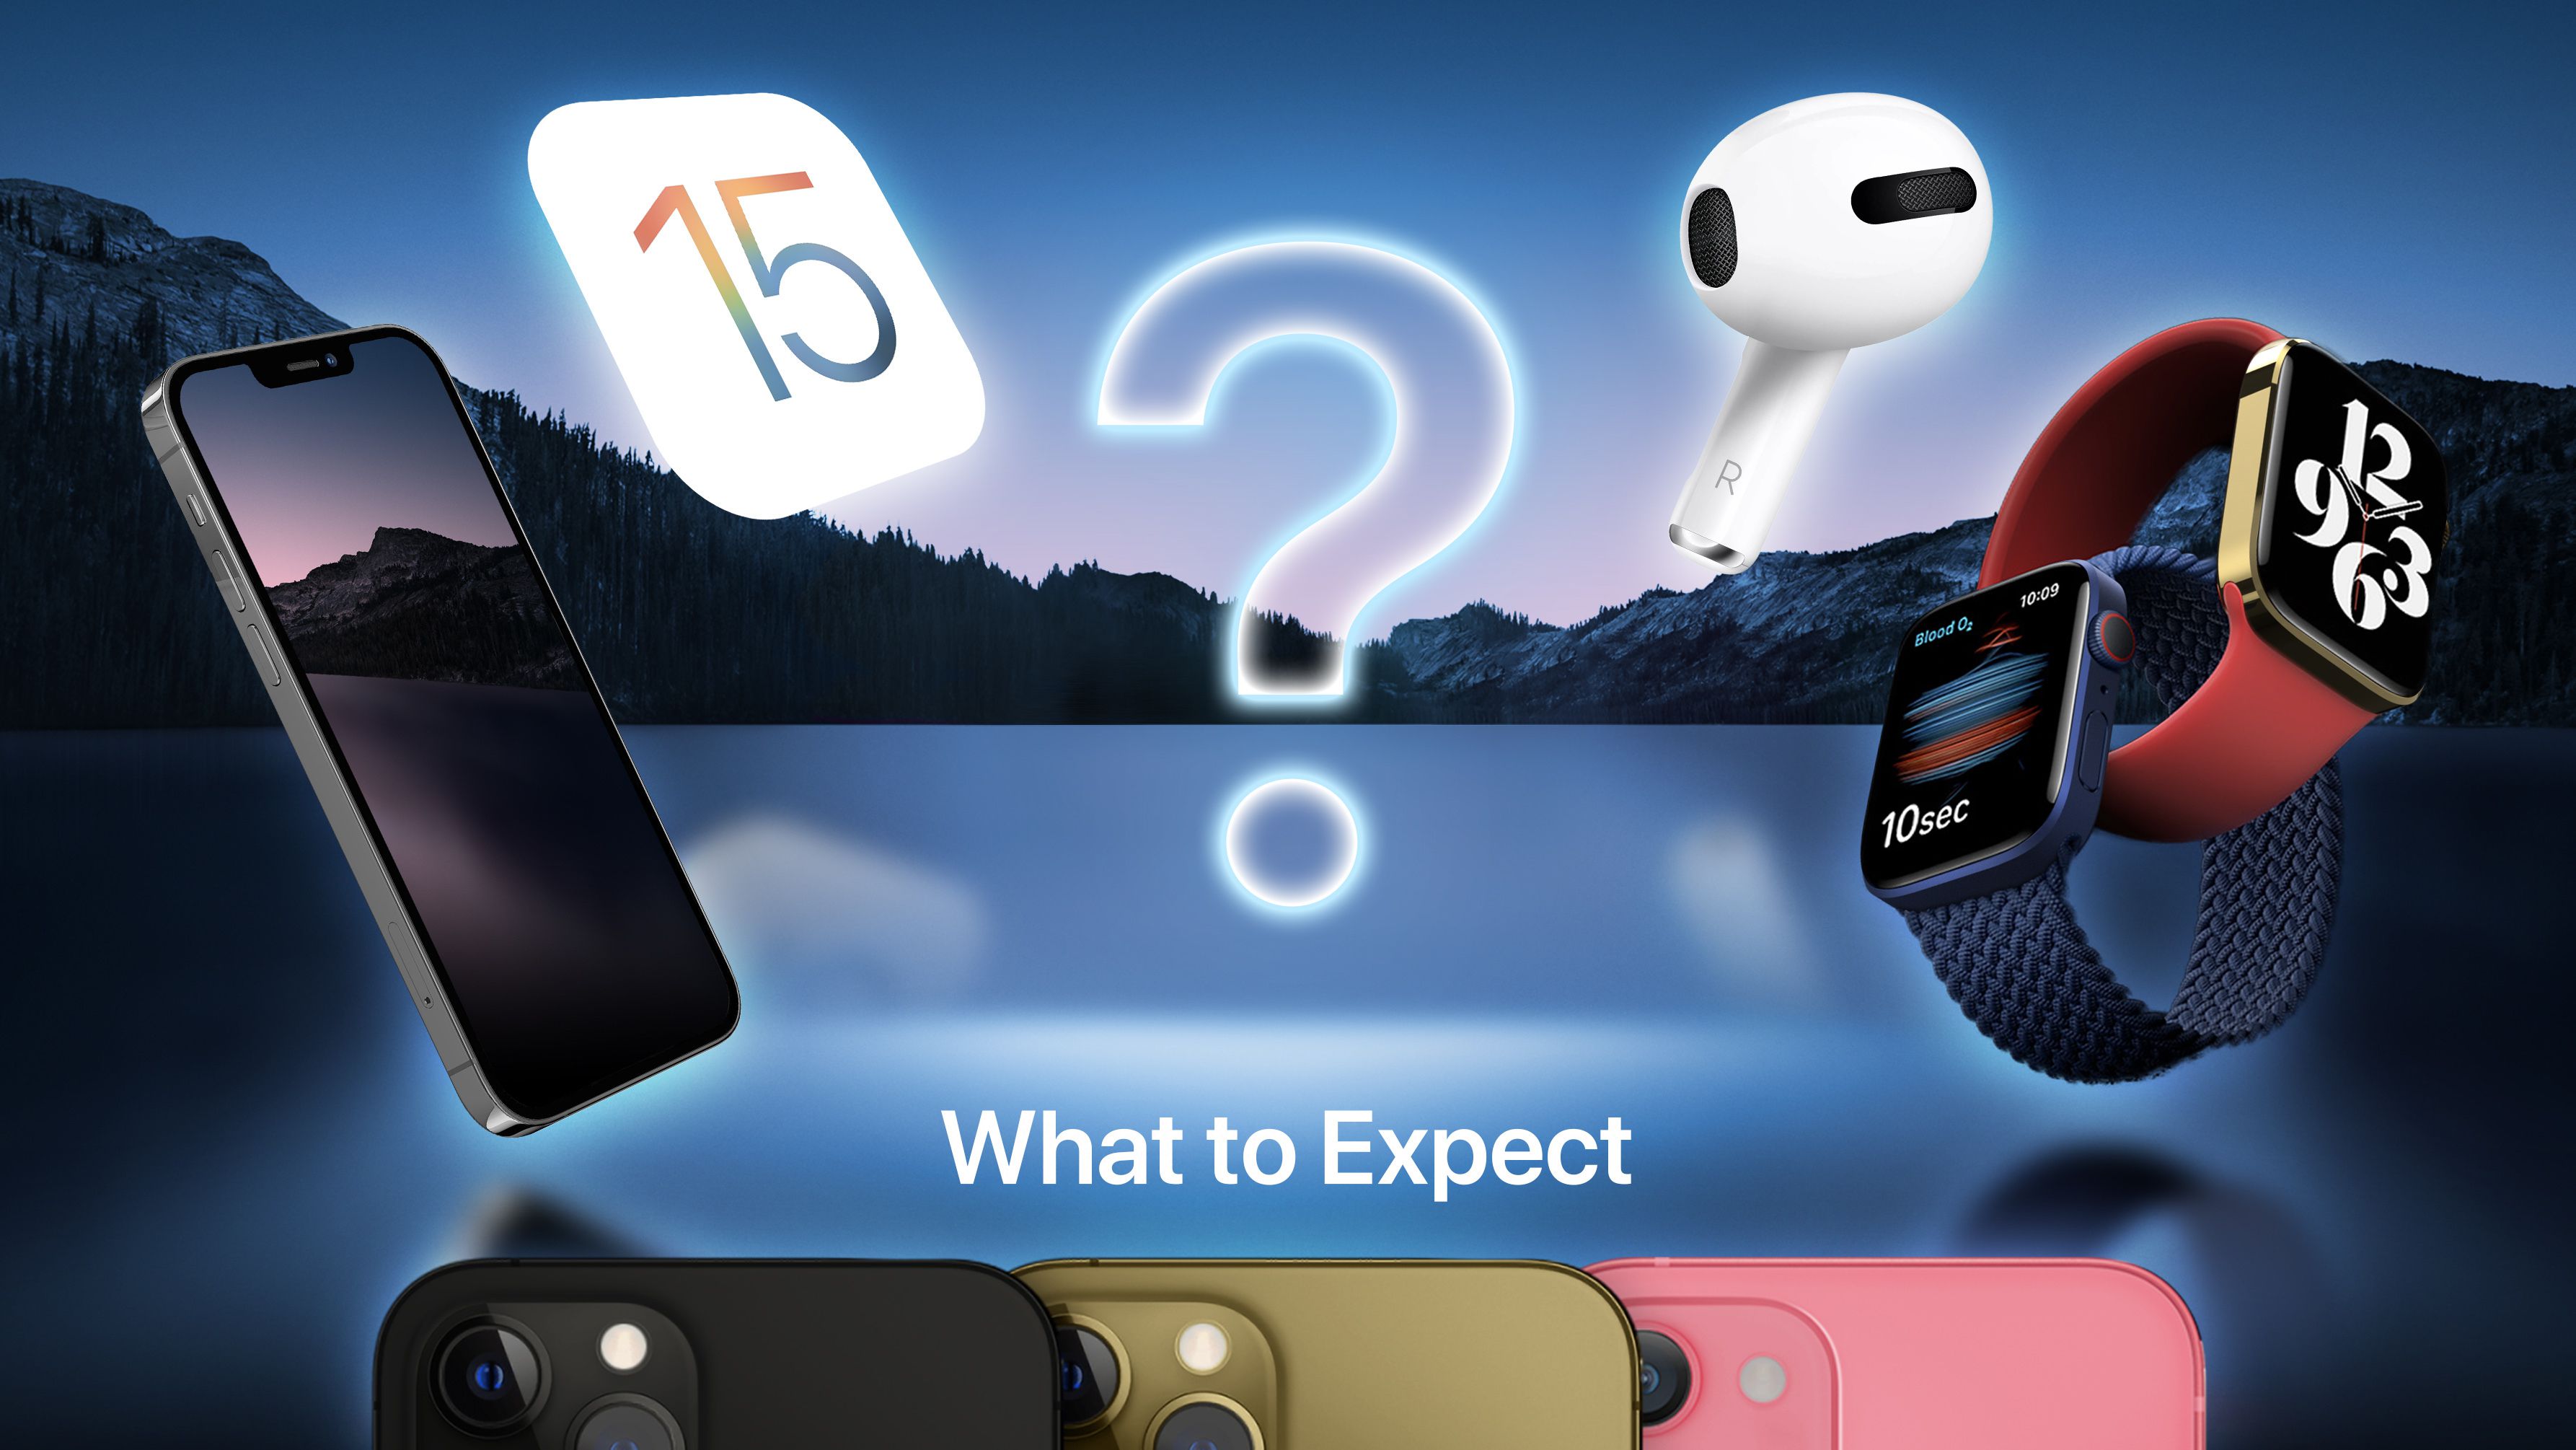 What to Expect at the September 14 Apple Event: iPhone 13, Apple Watch Series 7,..